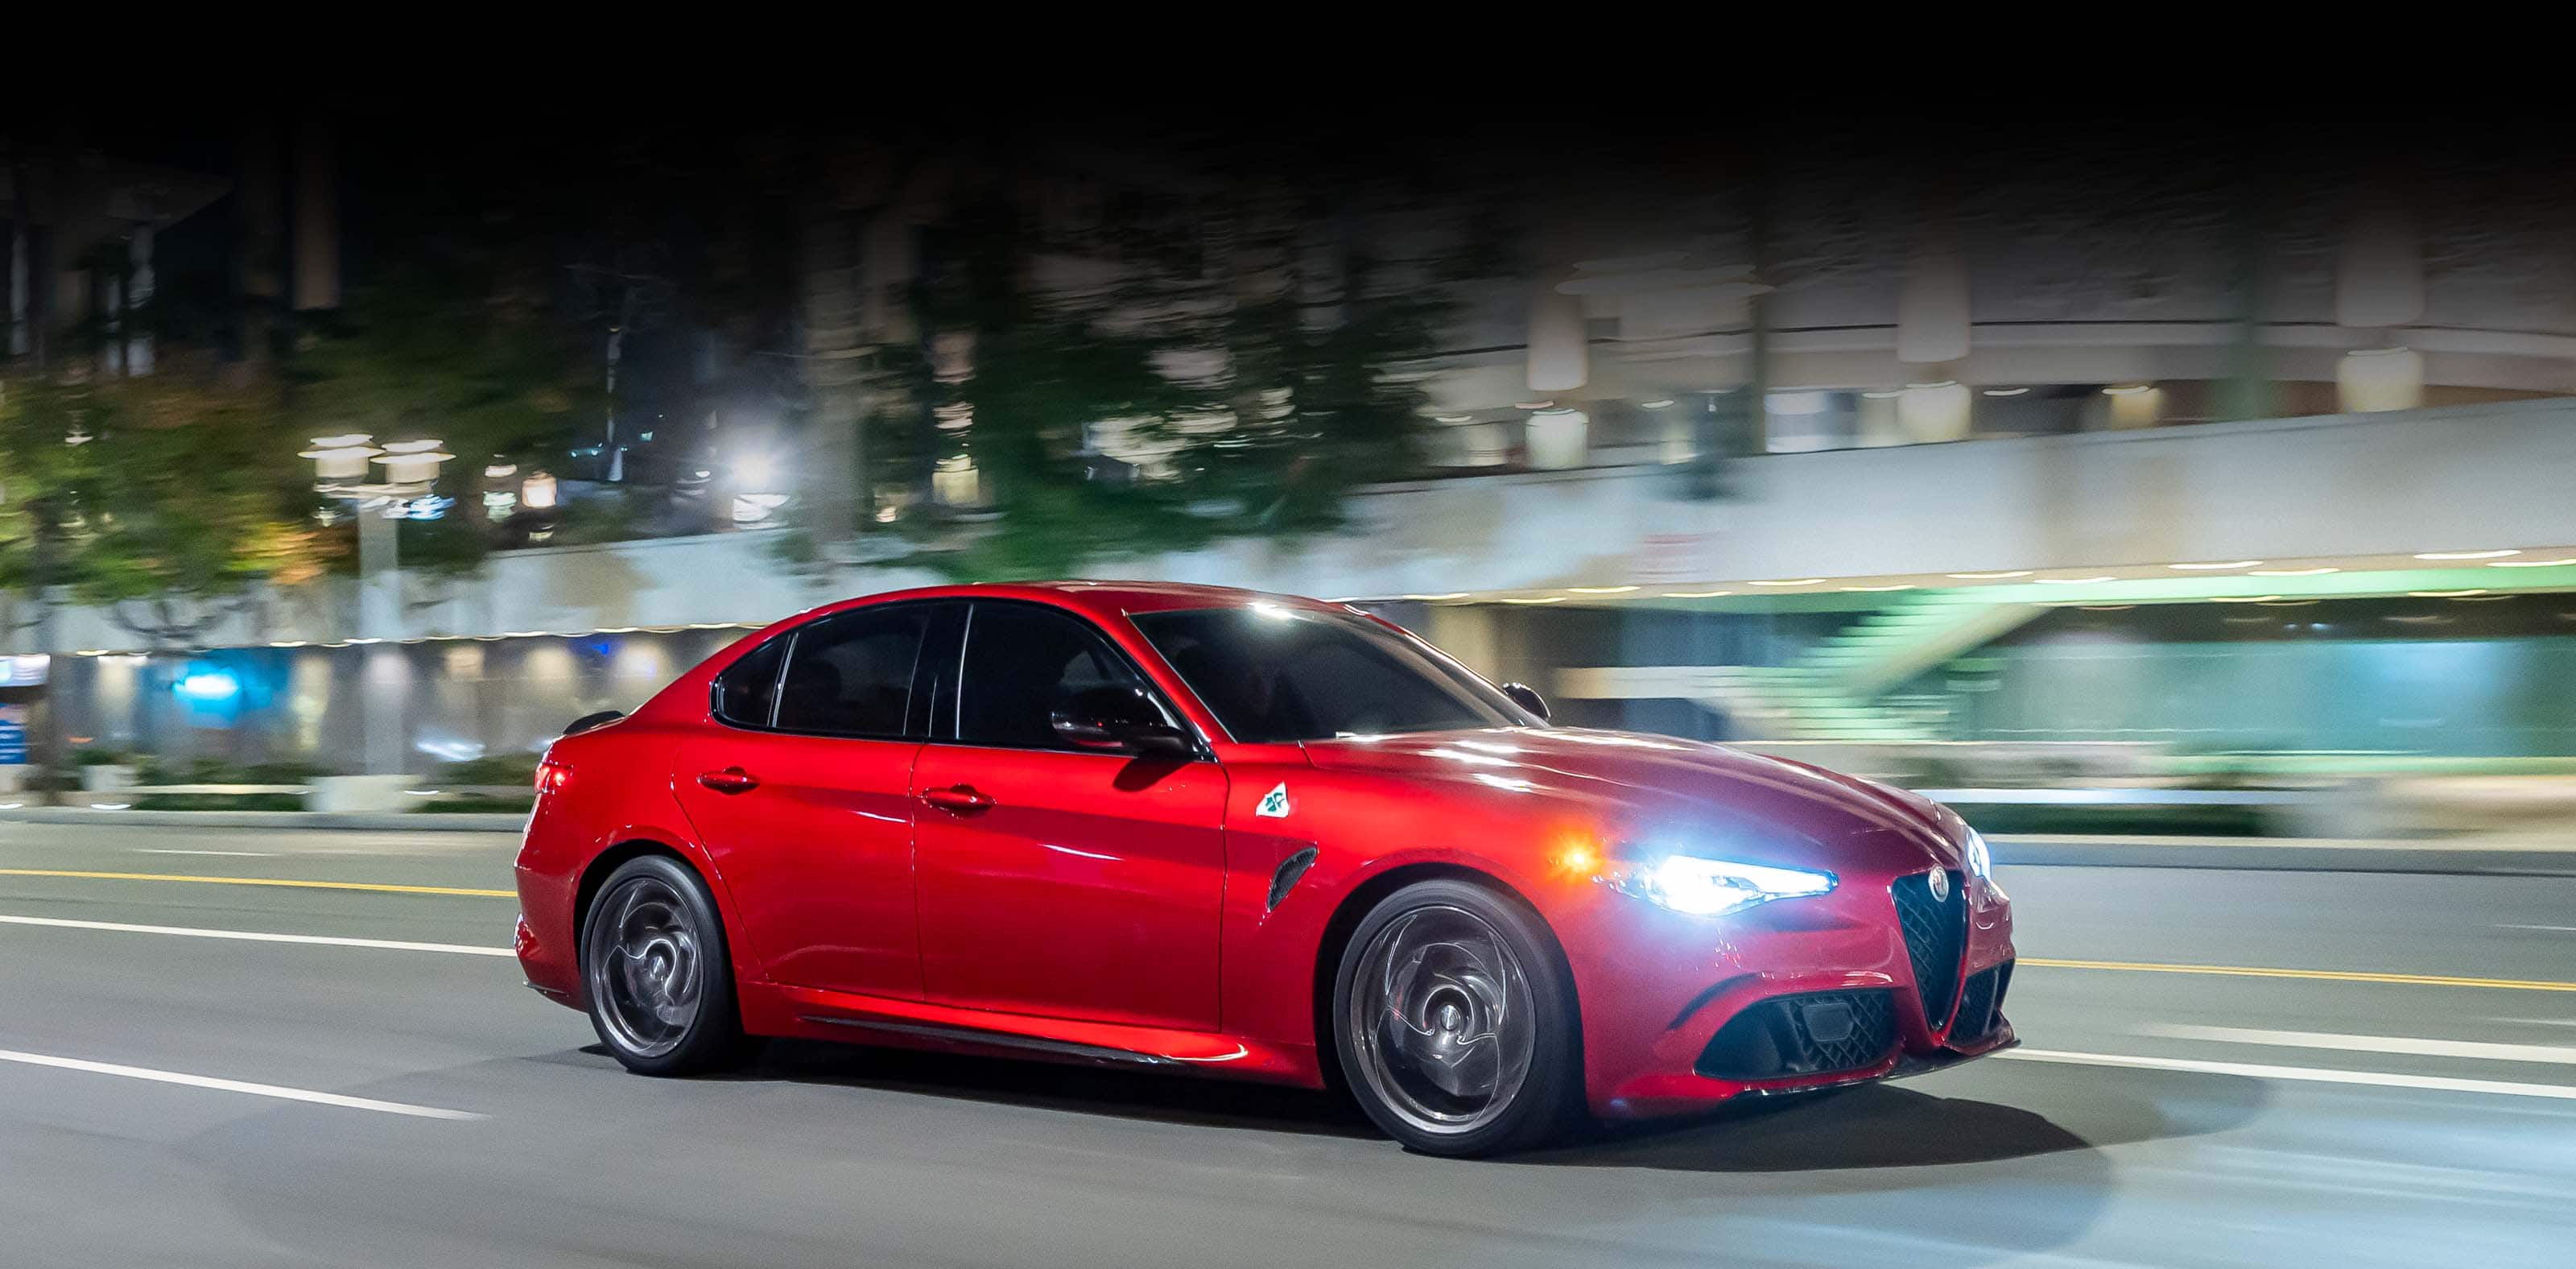 A passenger-side profile of a red 2023 Alfa Romeo Giulia Quadrifoglio being driven on a highway in the city at night. The background is blurred to indicate the speed of the vehicle.